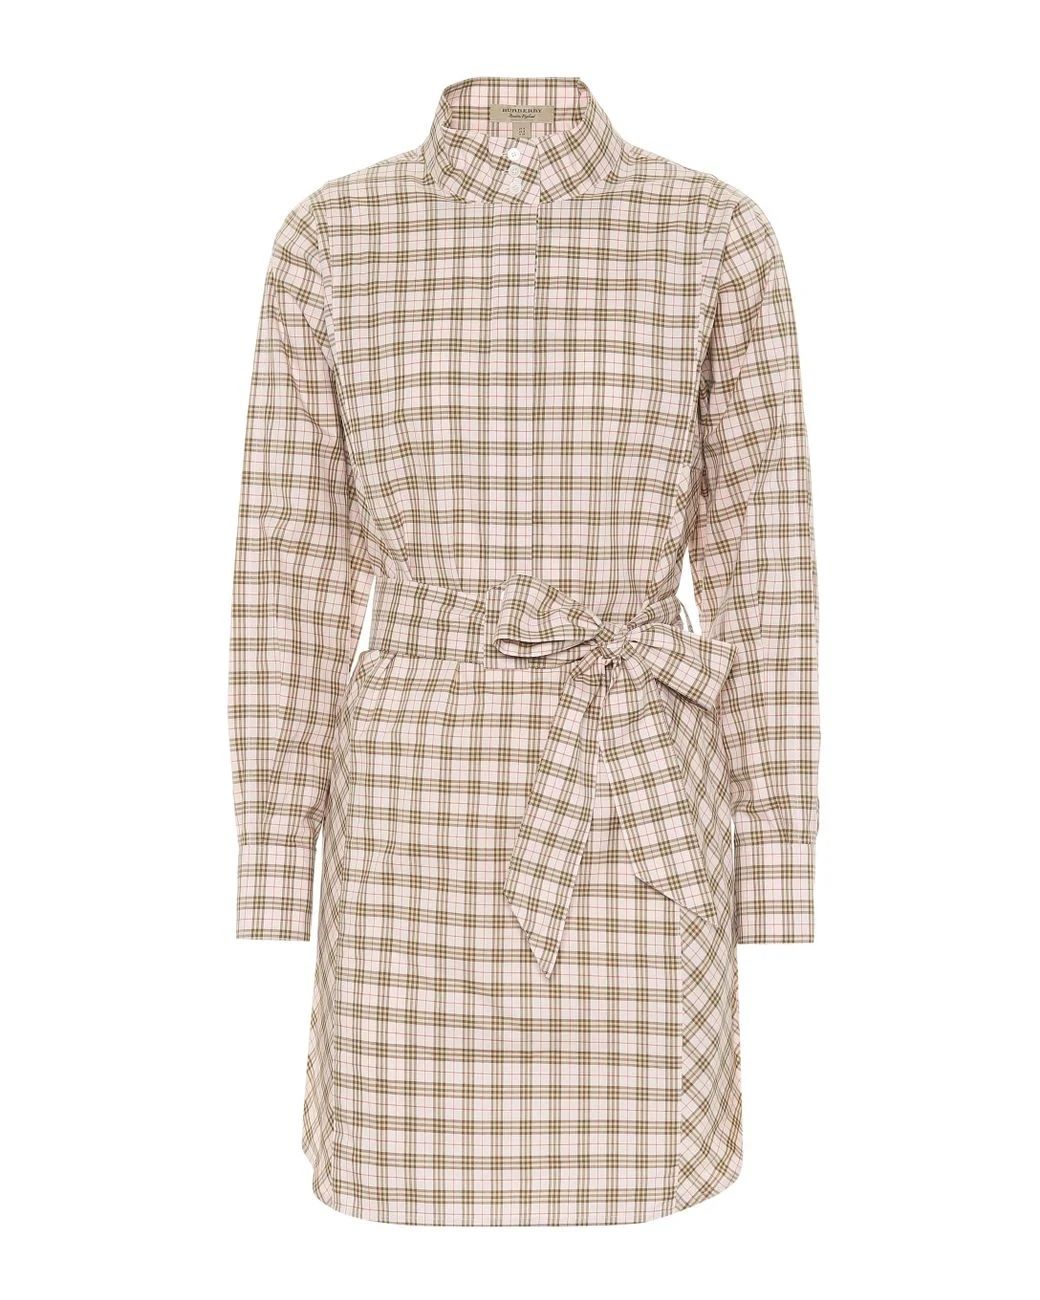 Iconic Check Cotton Shirt Dress in Sweet Pink